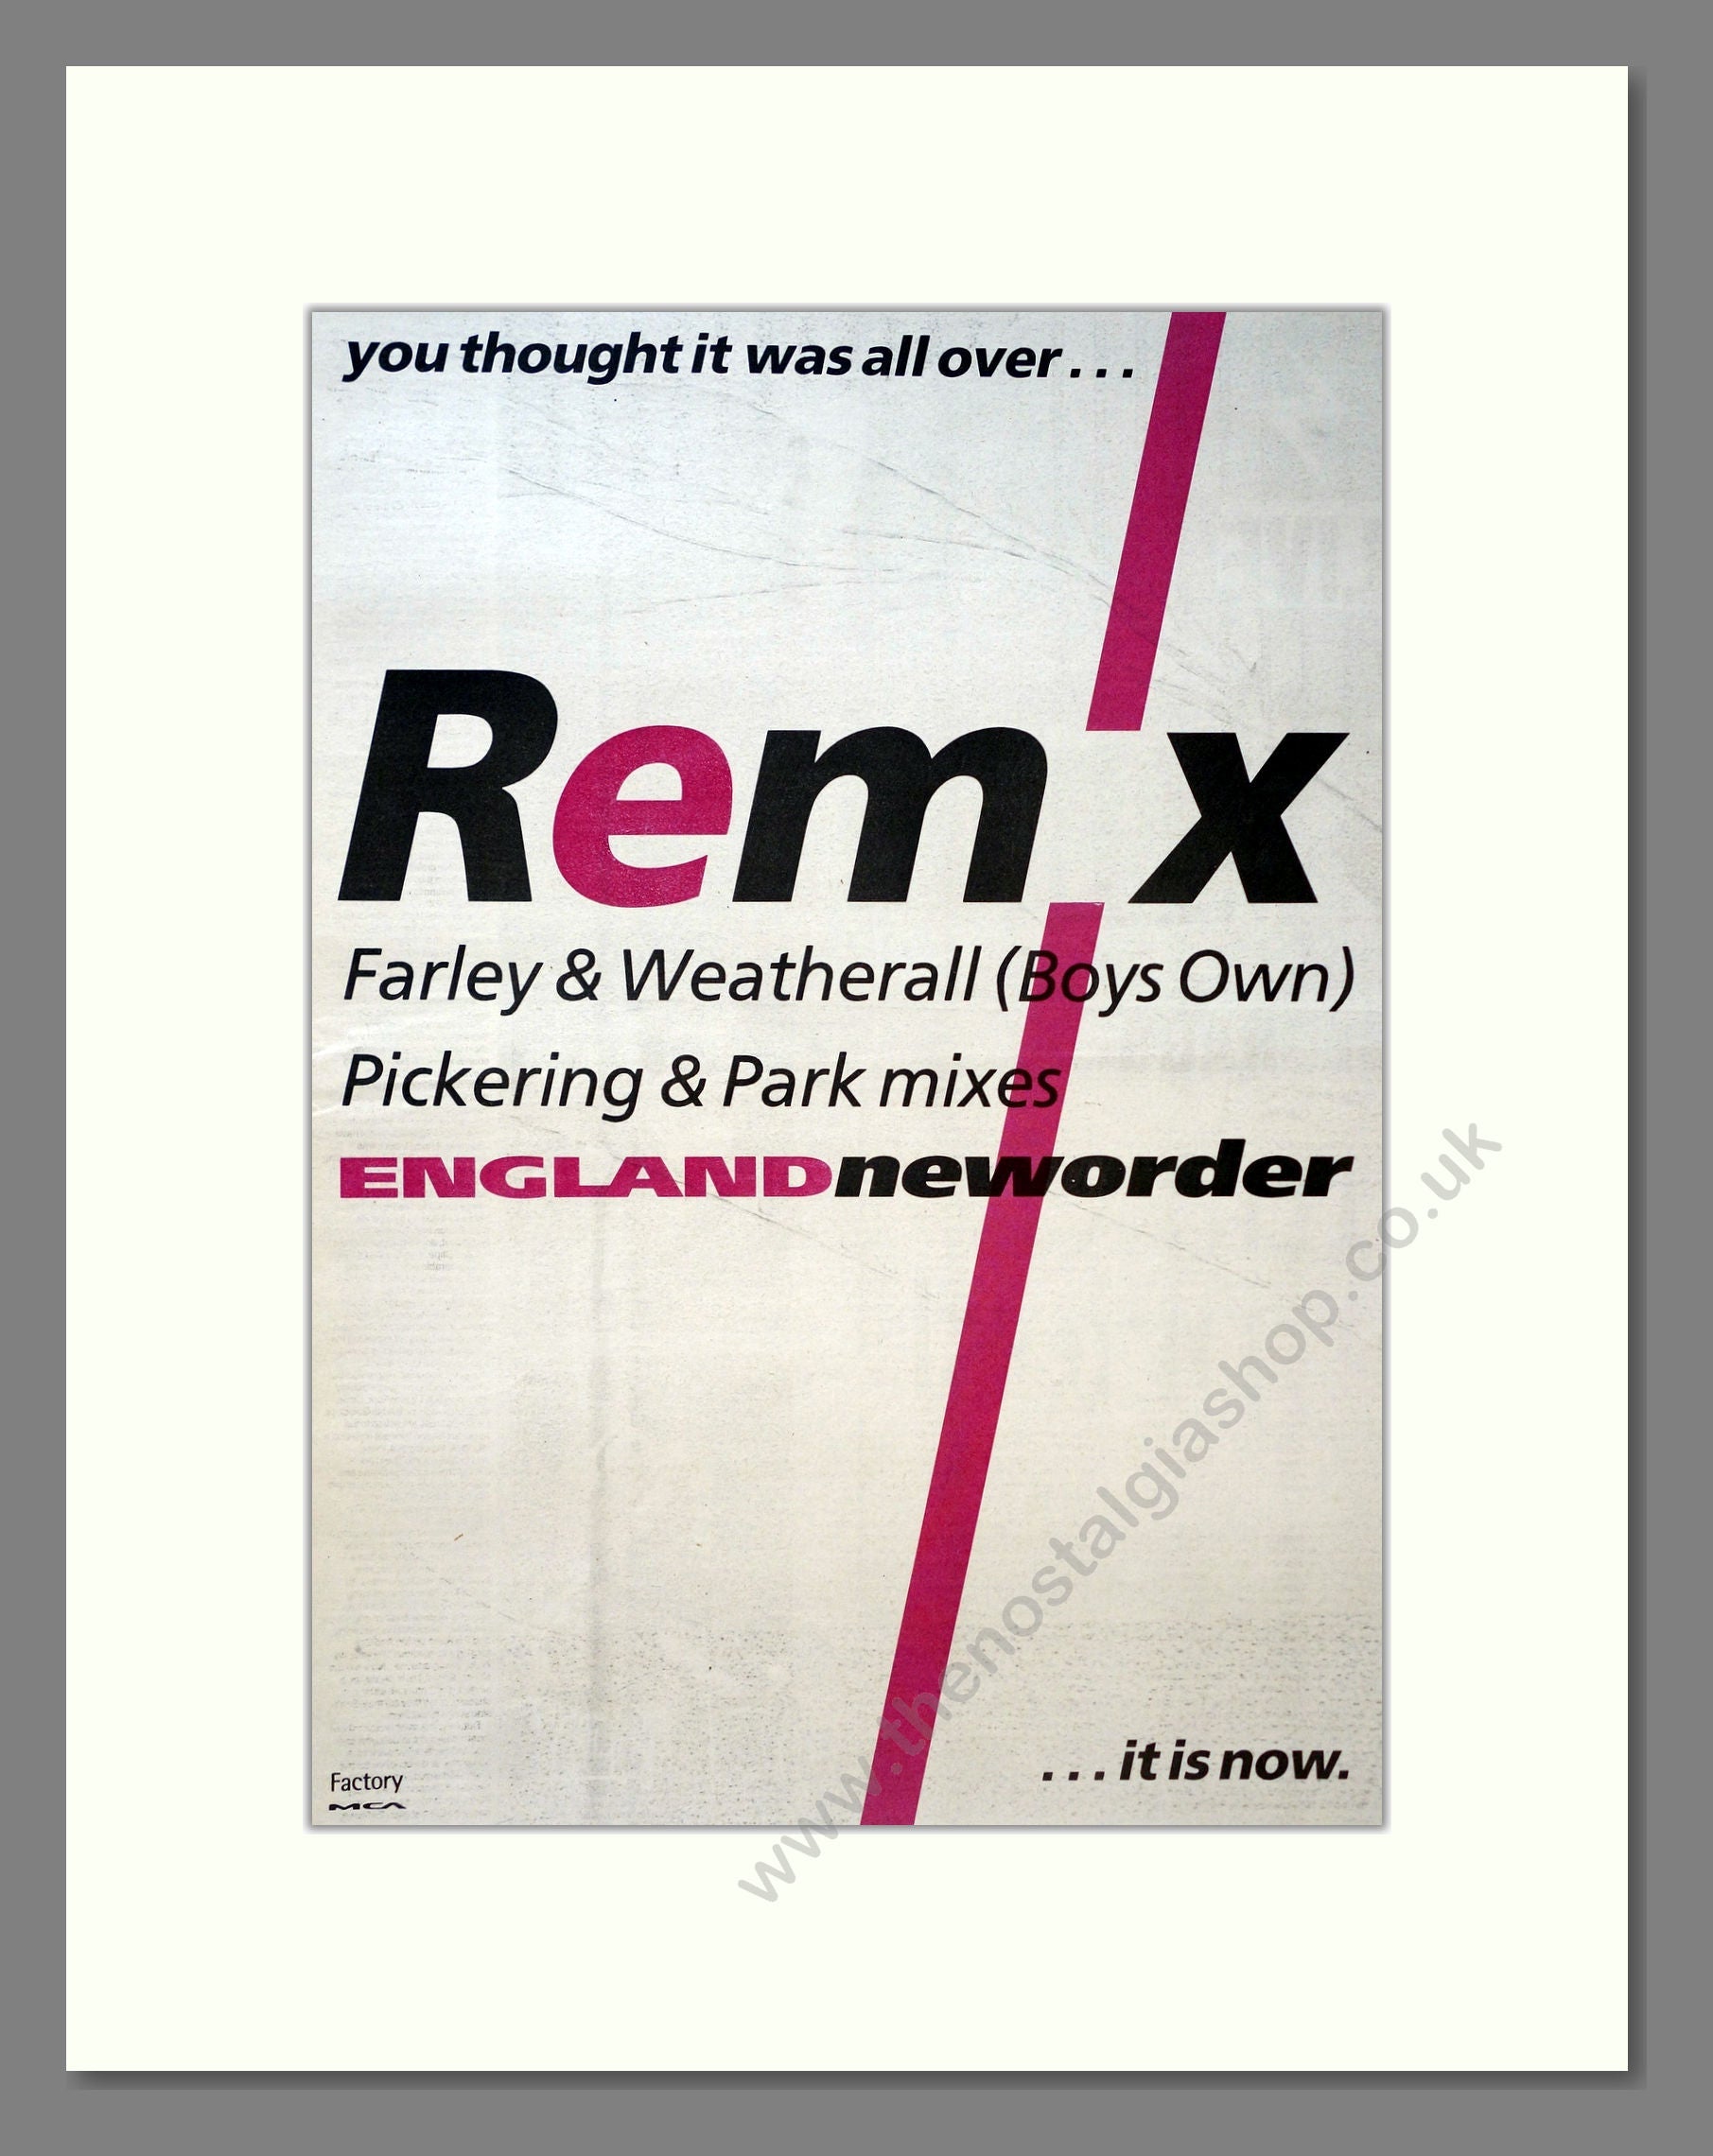 New Order - England Remix World In Motion. Vintage Advert 1990 (ref AD18297)